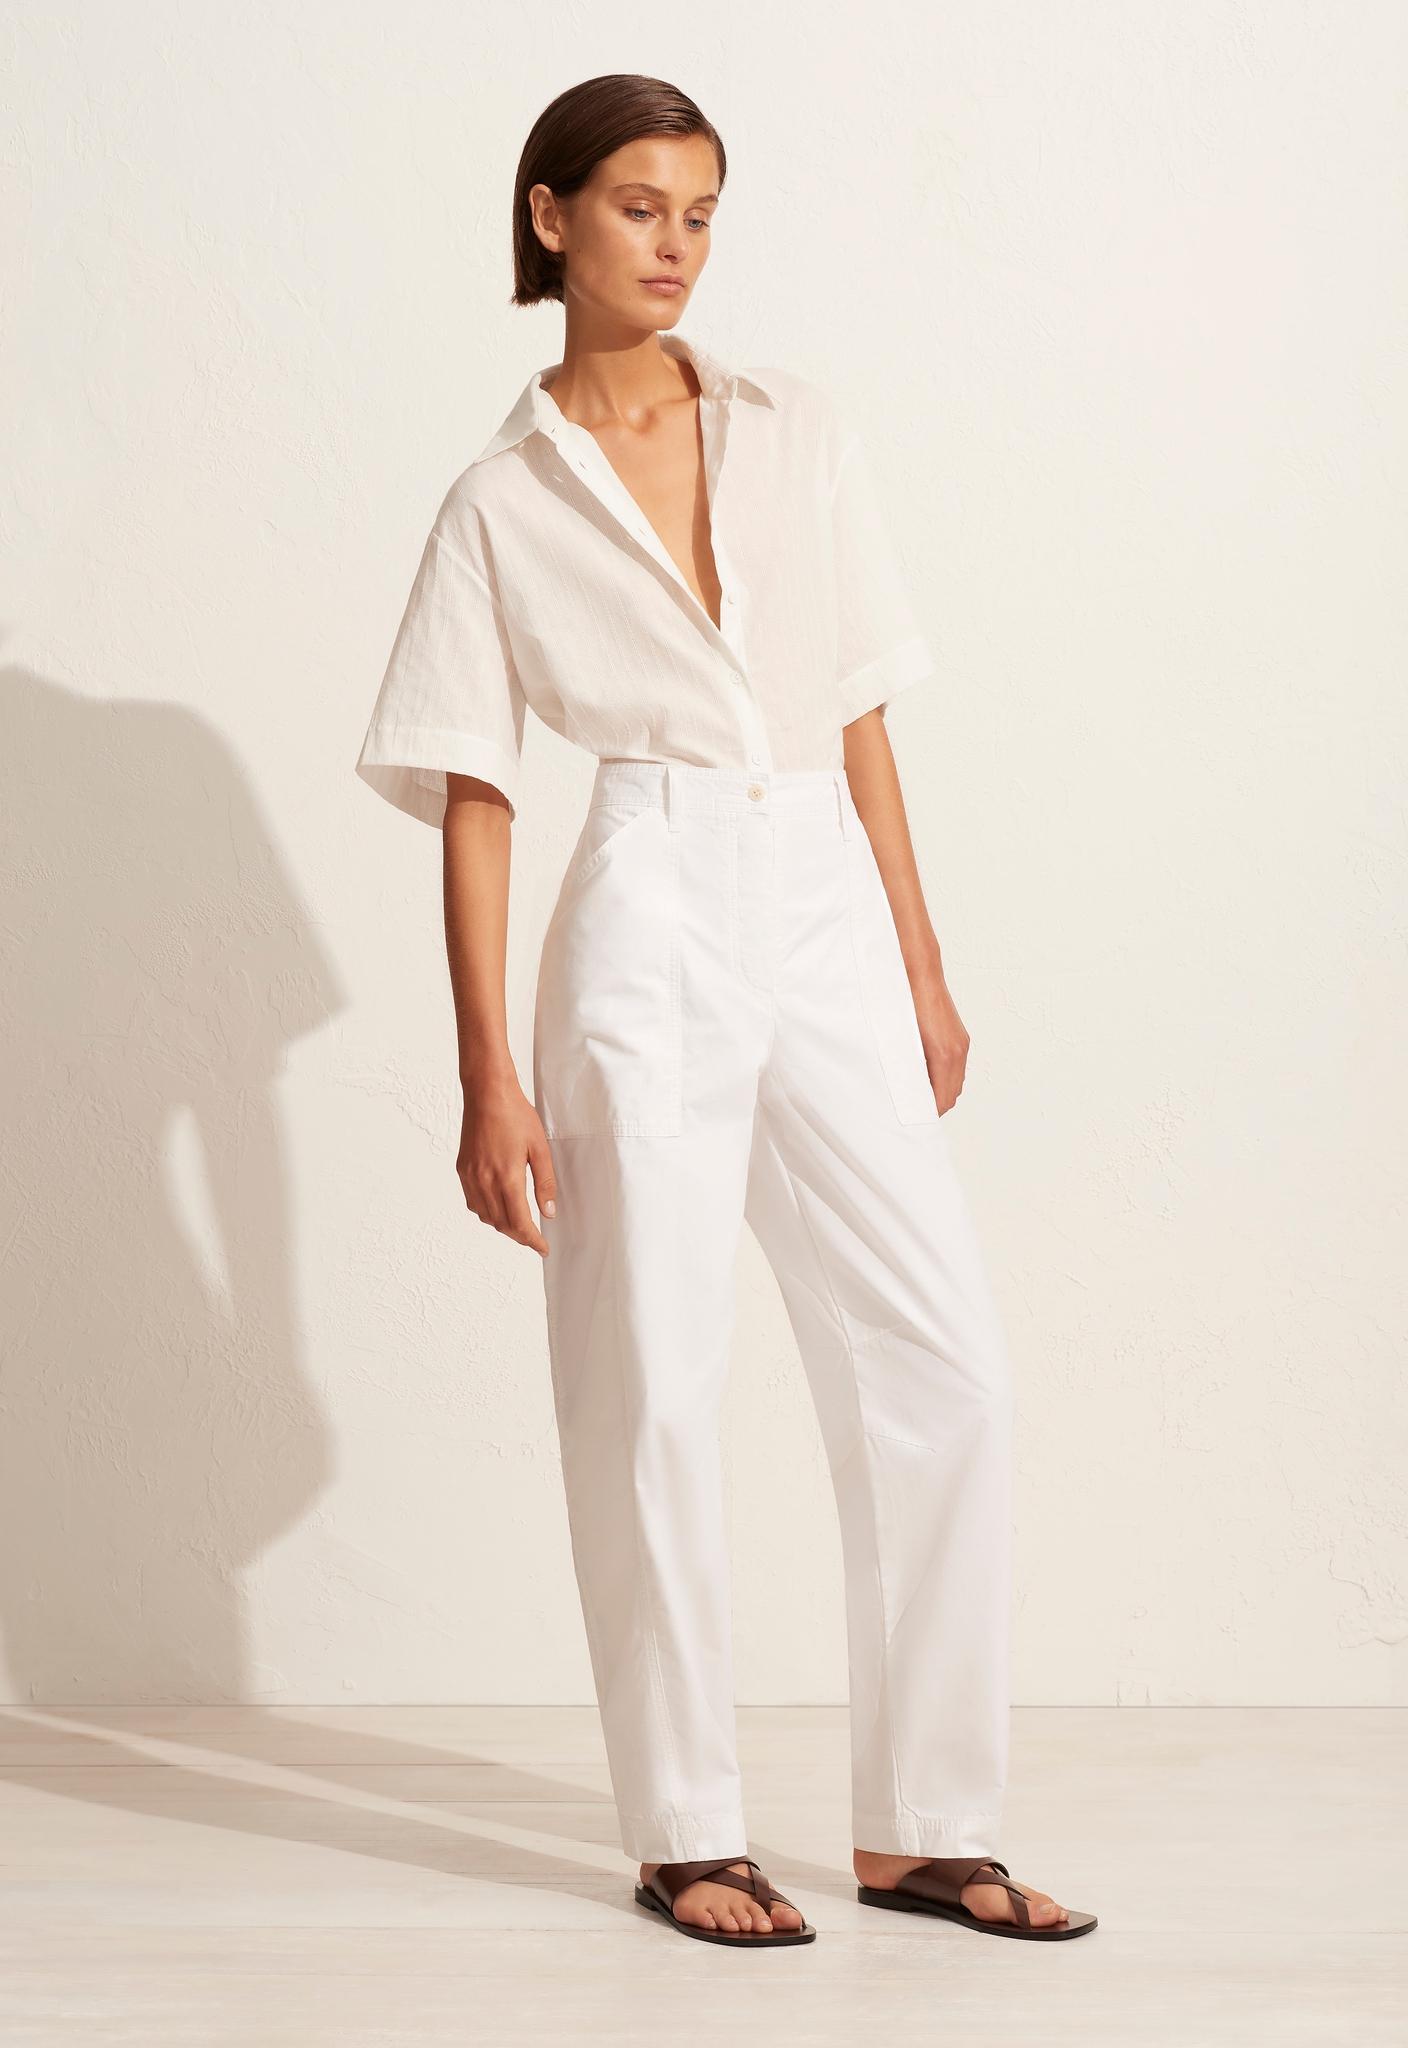 Relaxed Cargo Pant - White - Matteau